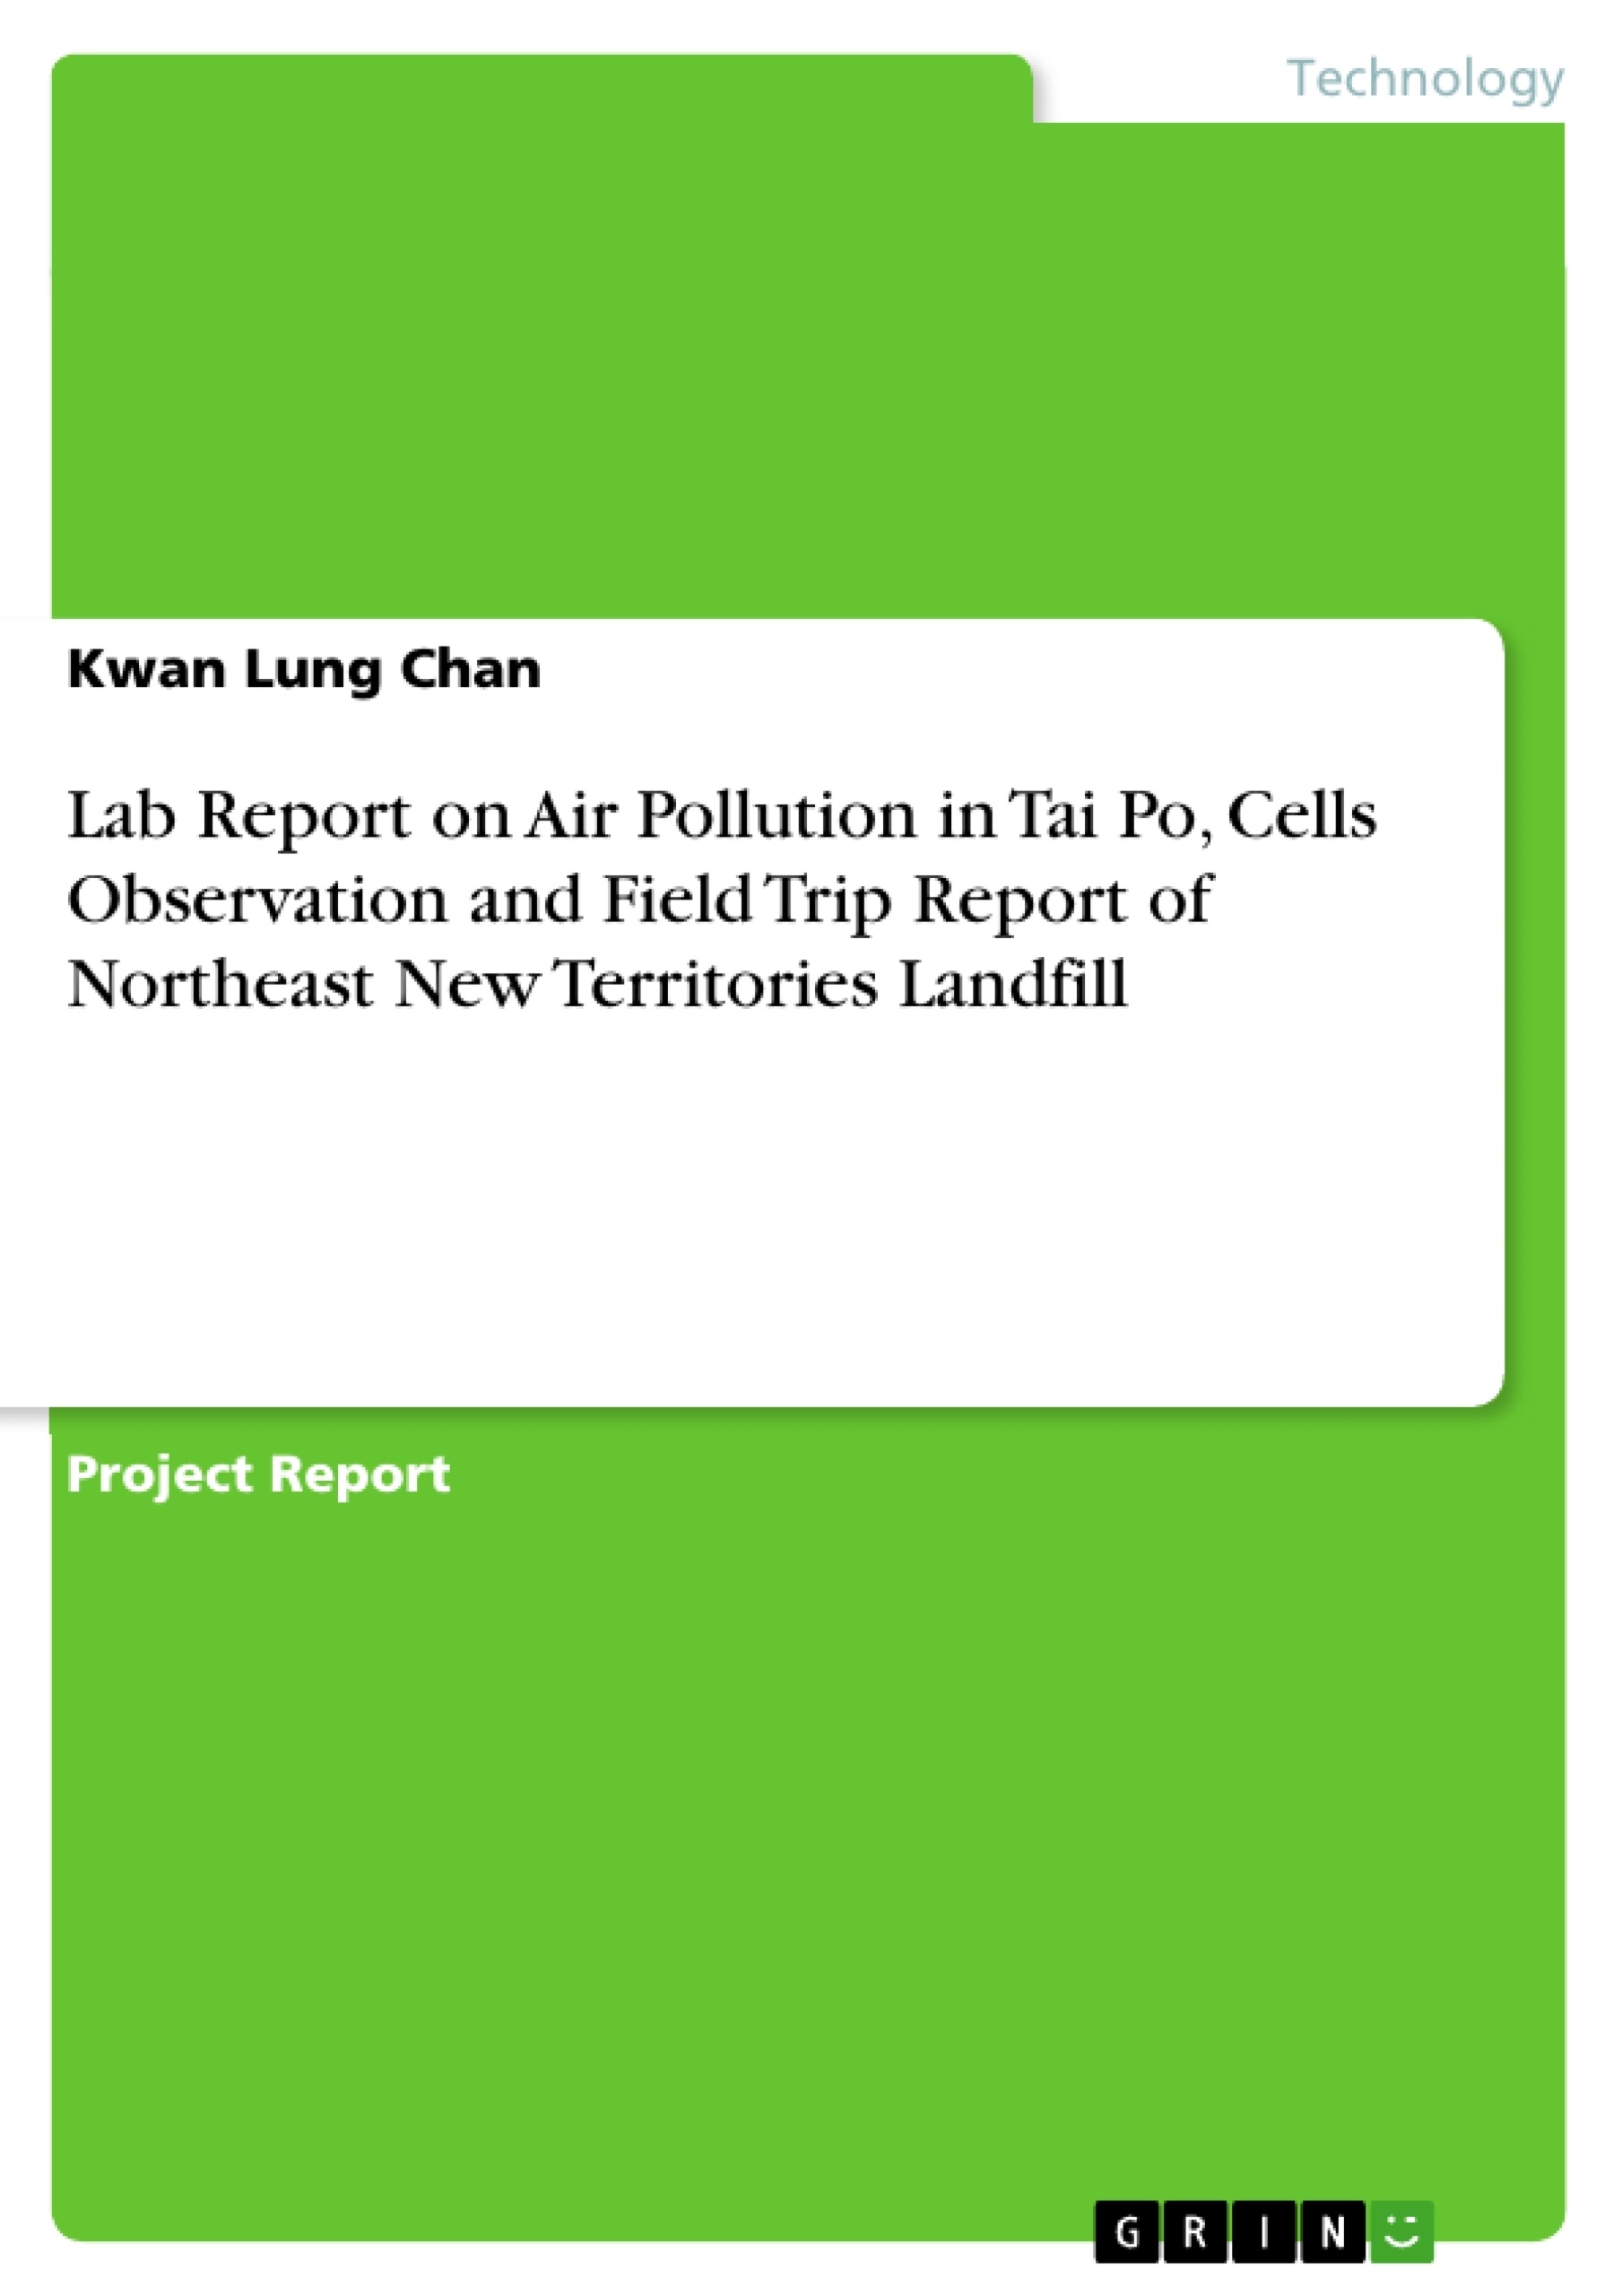 Title: Lab Report on Air Pollution in Tai Po, Cells Observation and Field Trip Report of Northeast New Territories Landfill